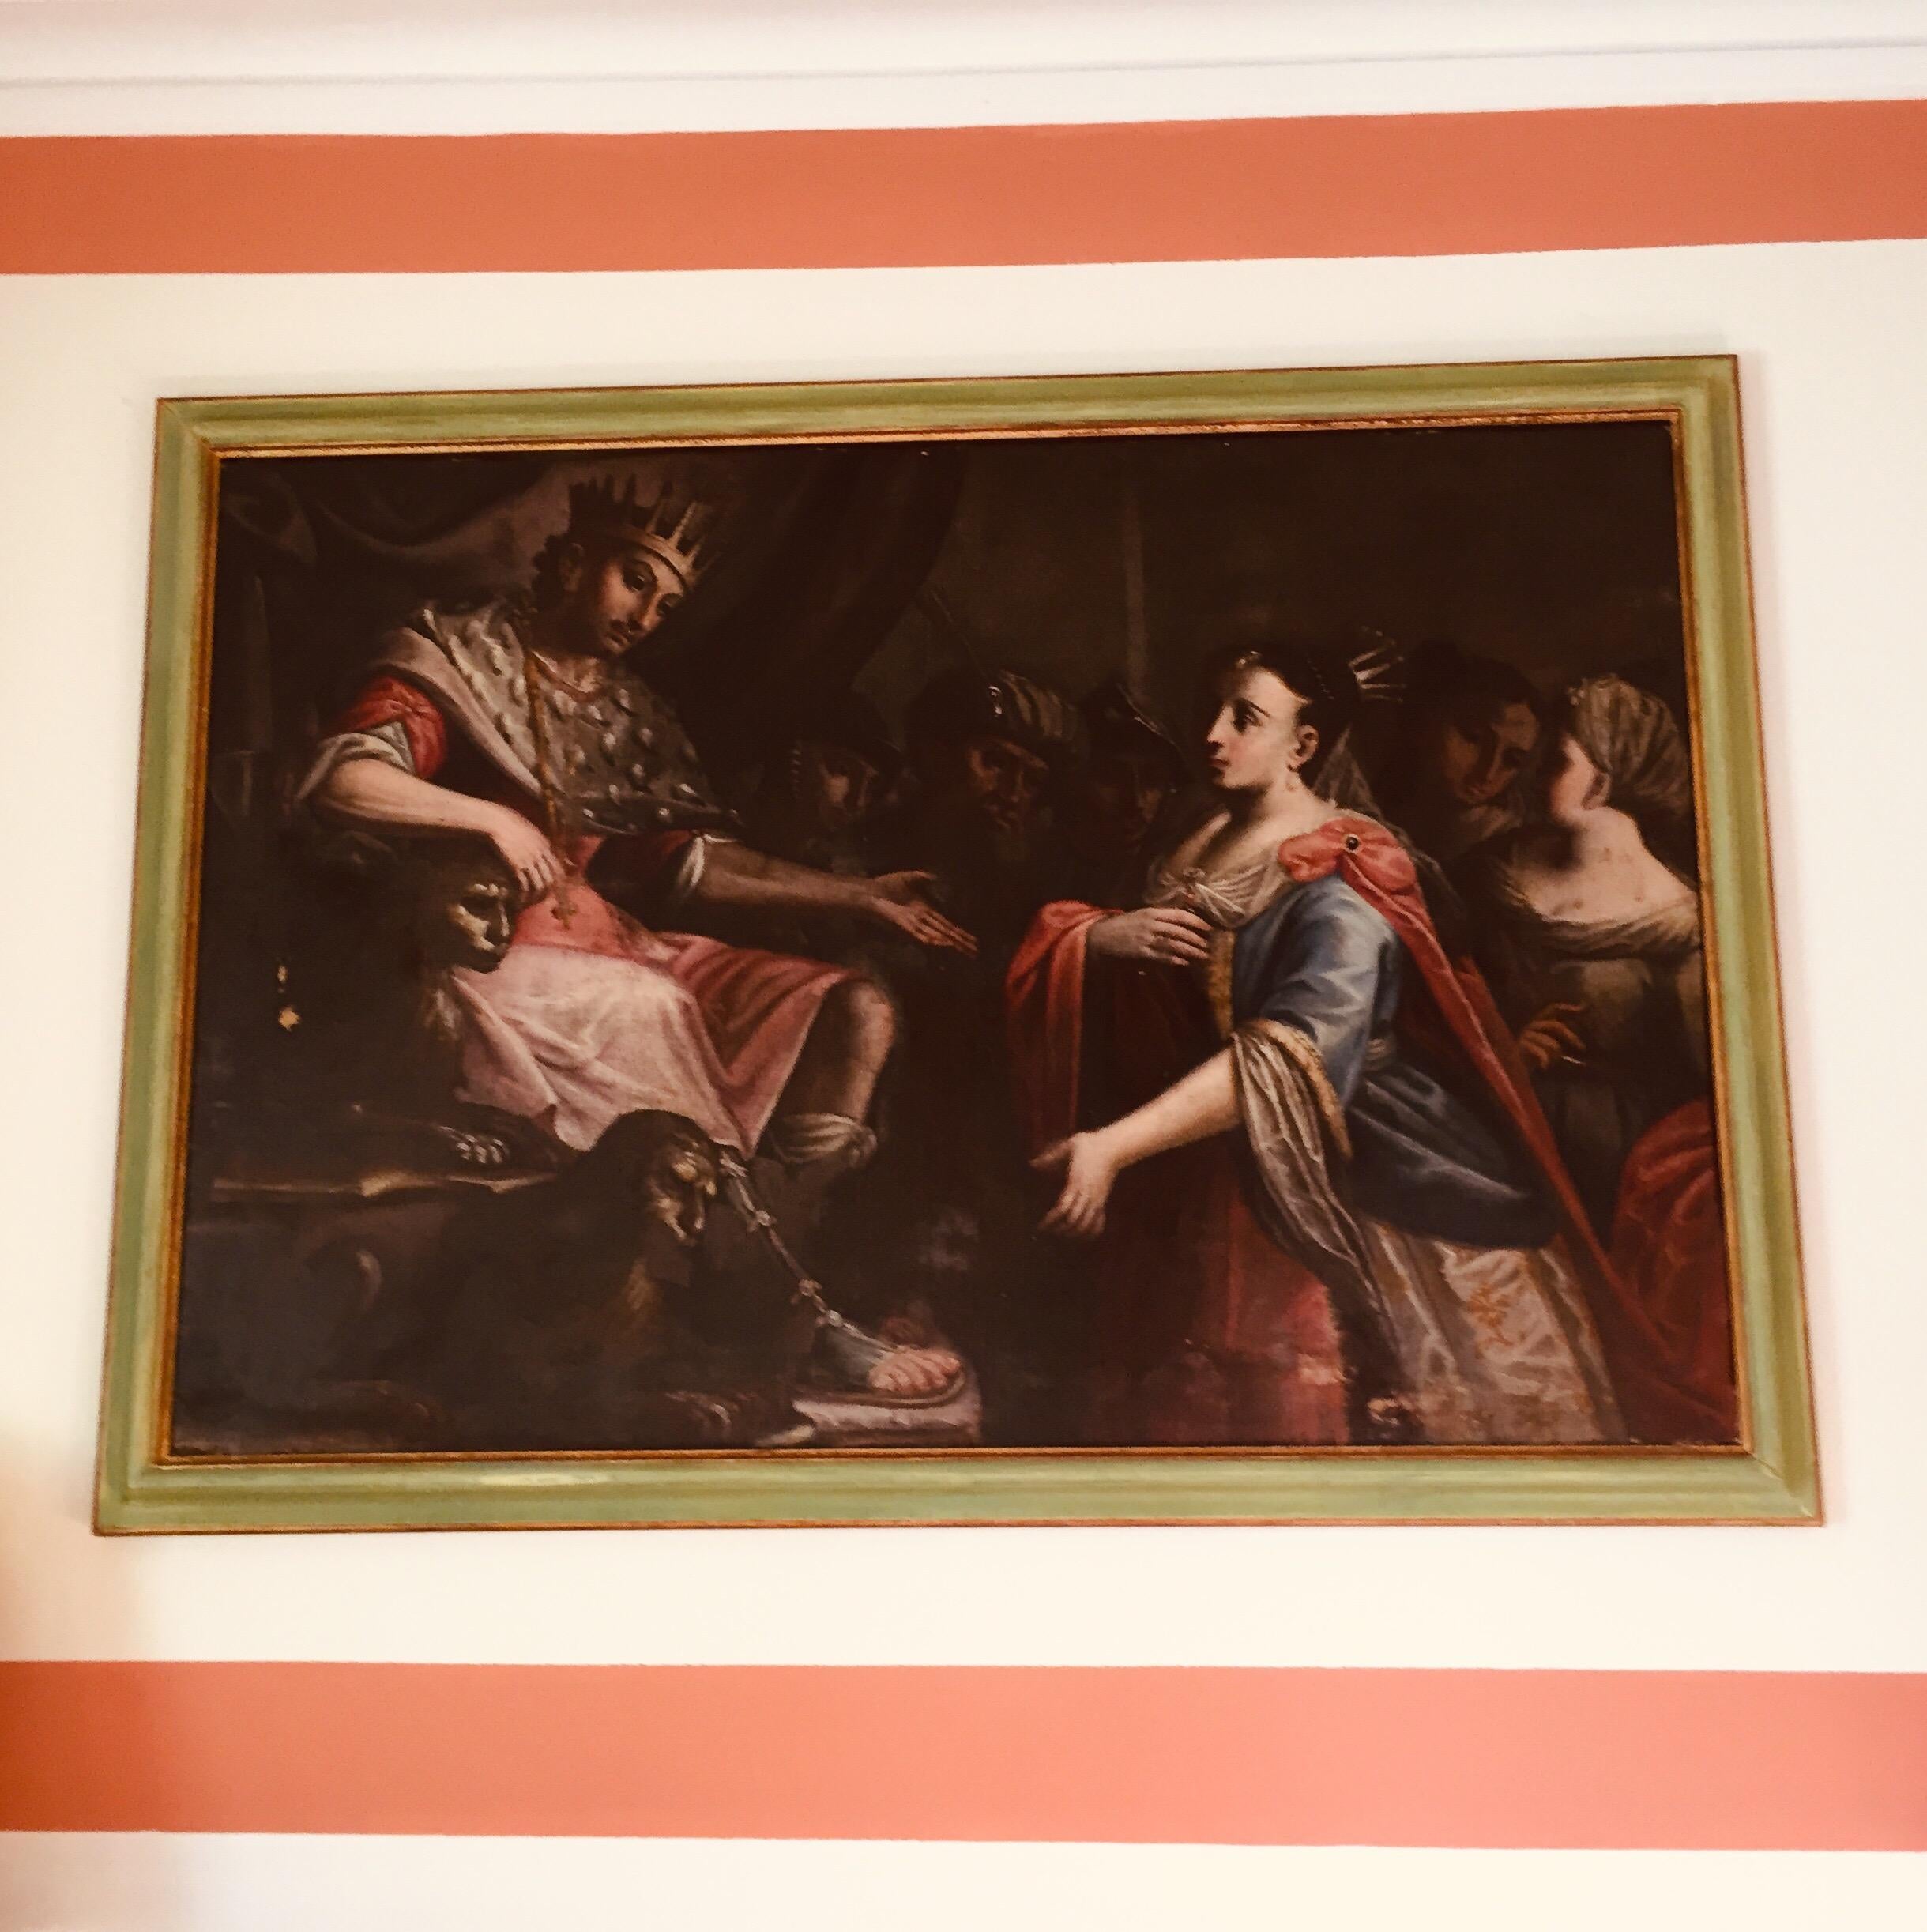 Esther and King Ahasuerus large oil on canvas biblical painting with figures, dating back to late 18th century, Italian School, 1780 circa, in fair age related condition, framed. 

According to the Hebrew Bible, Esther was a Jewish Queen of the